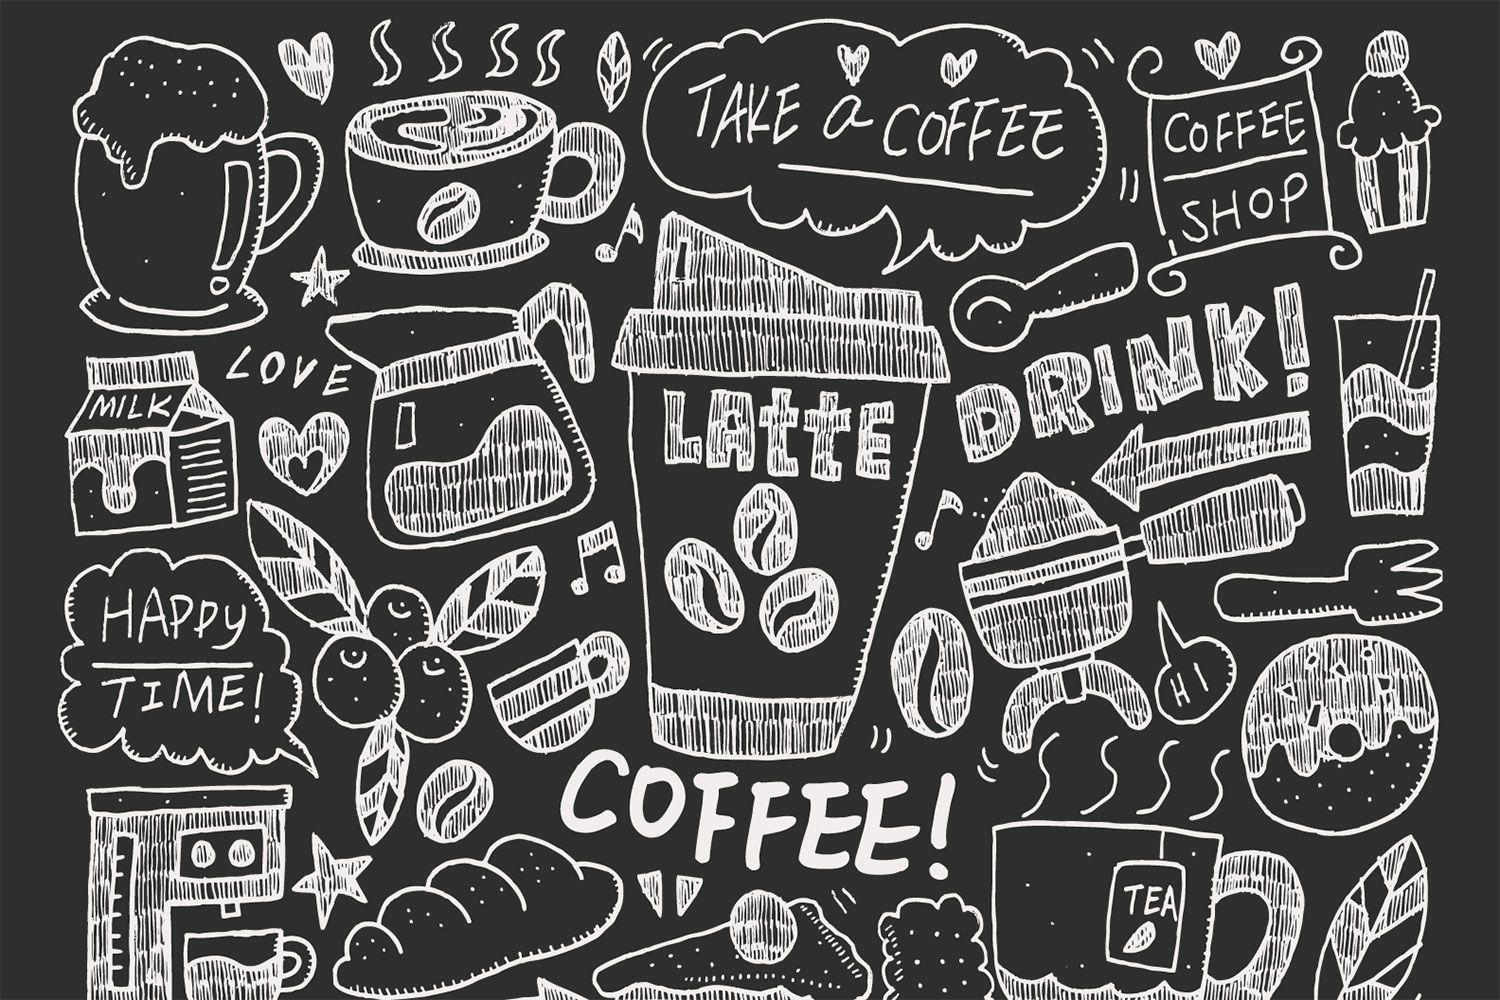 Coffee Doodle Wallpaper for Cafe Decor. Coffee